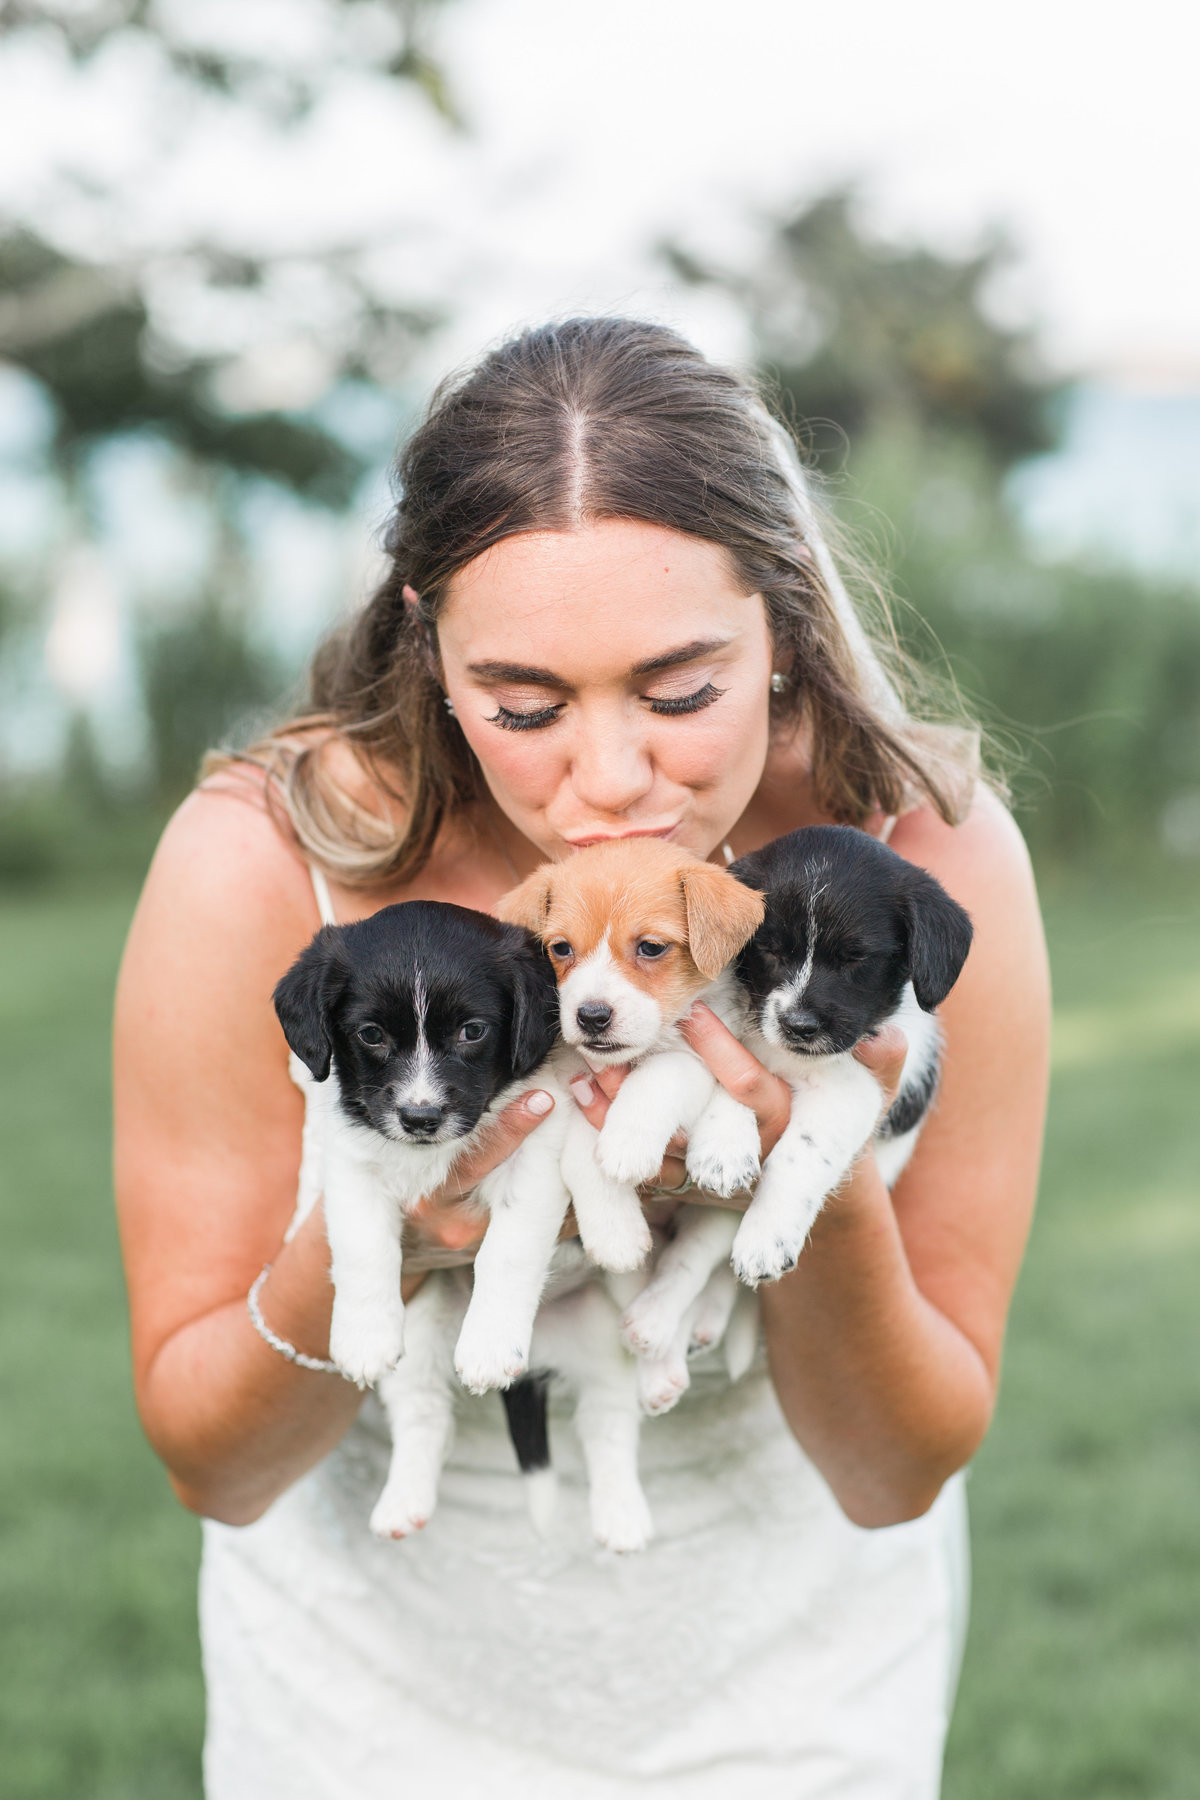 Bride holding and kissing three adoptable puppies